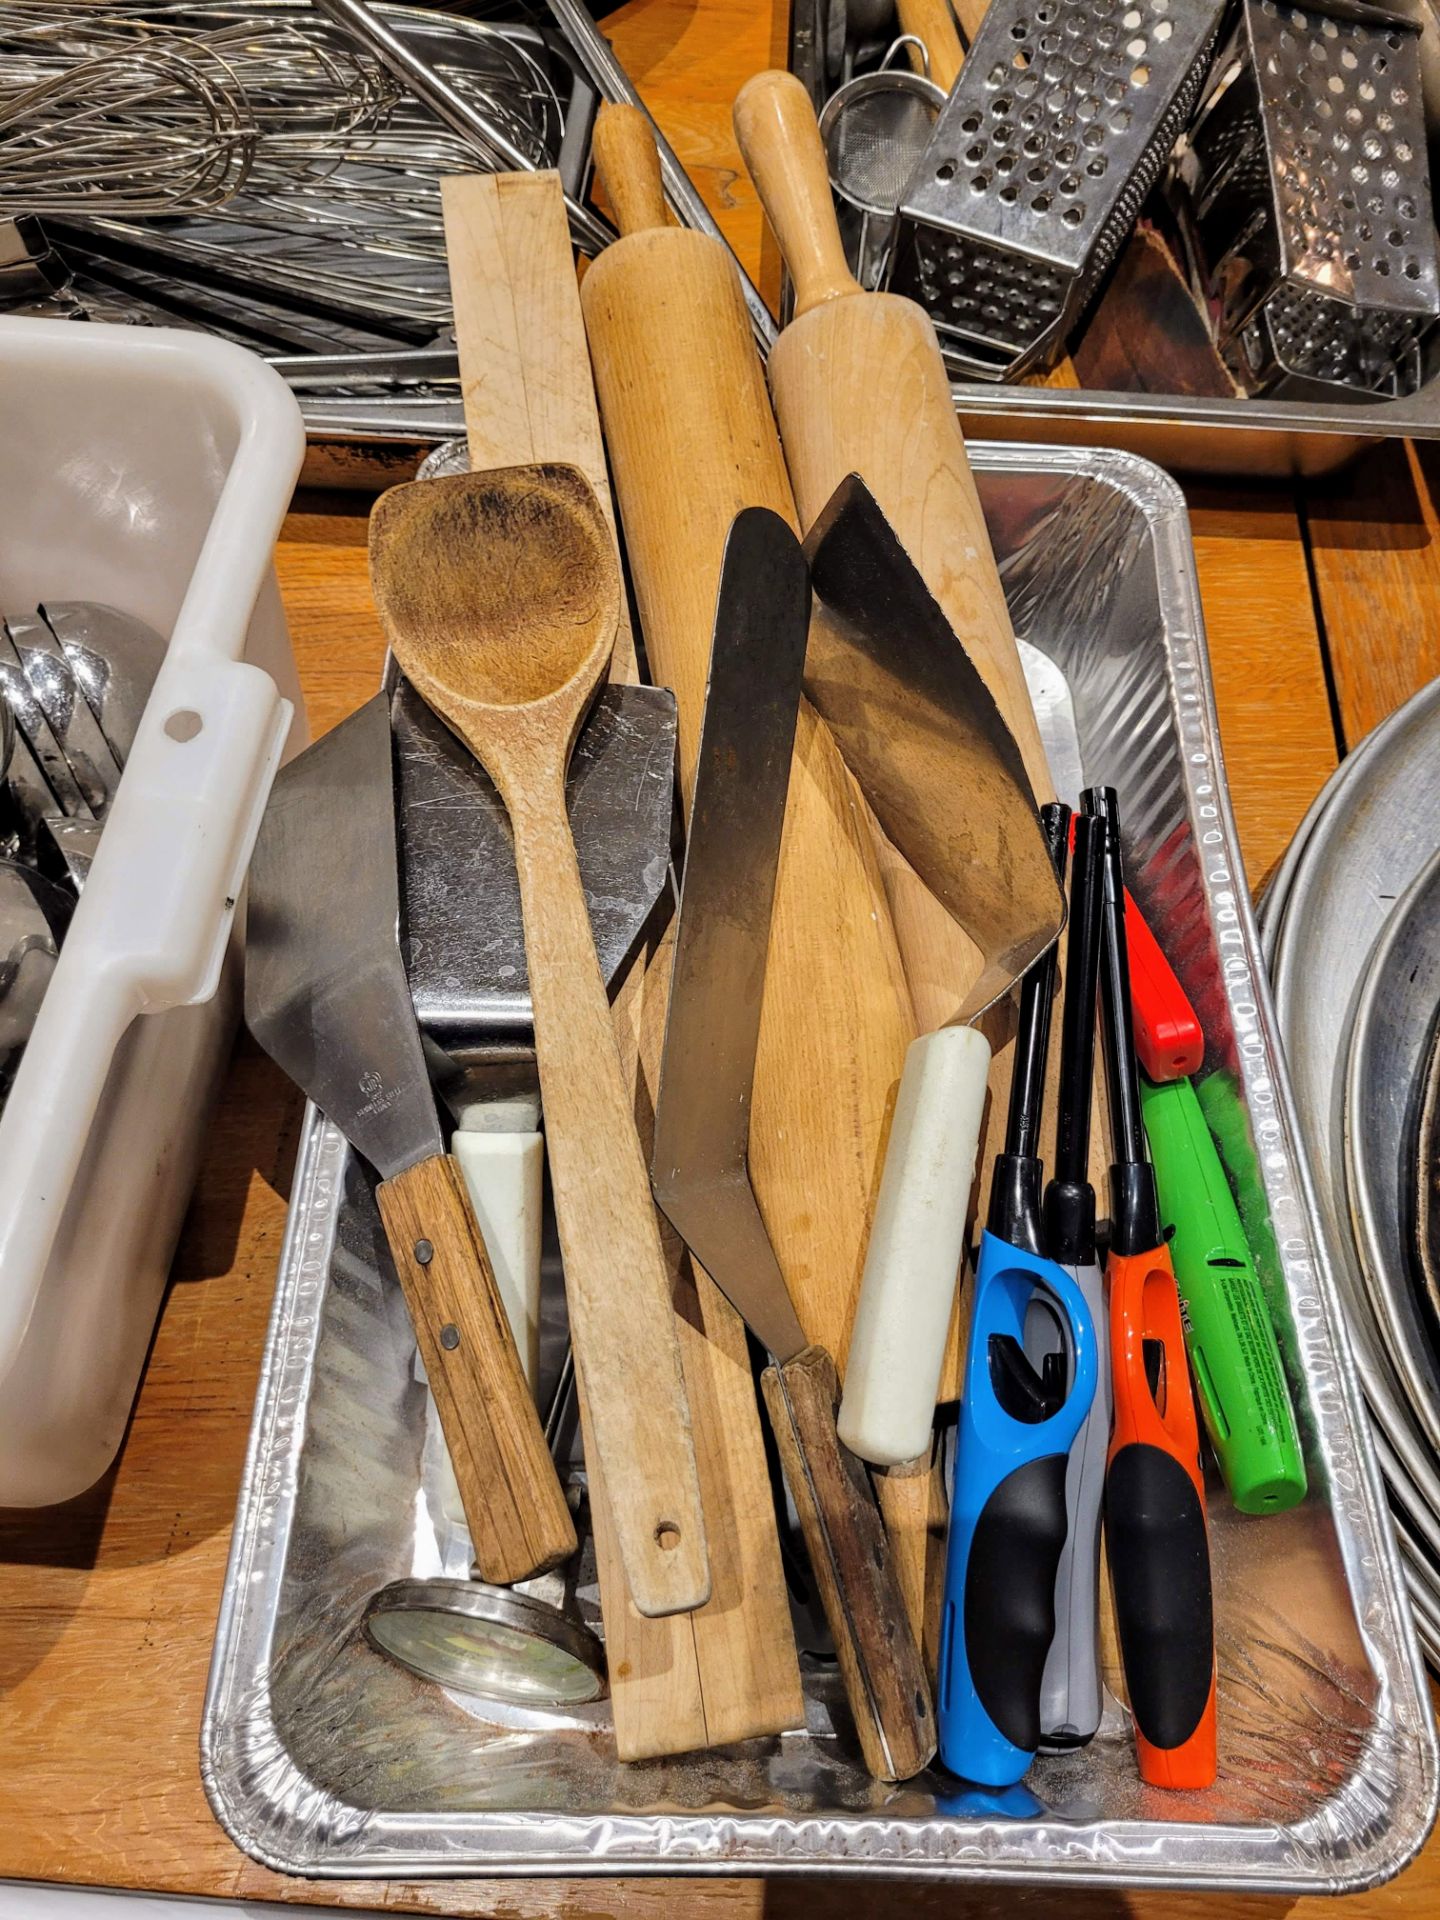 LOT - LARGE ASSORTMENT OF KITCHEN UNTENSILS: LADELS, TONGS, WHISKS, ROLLING PINS, WOODEN SPOONS, - Image 4 of 15